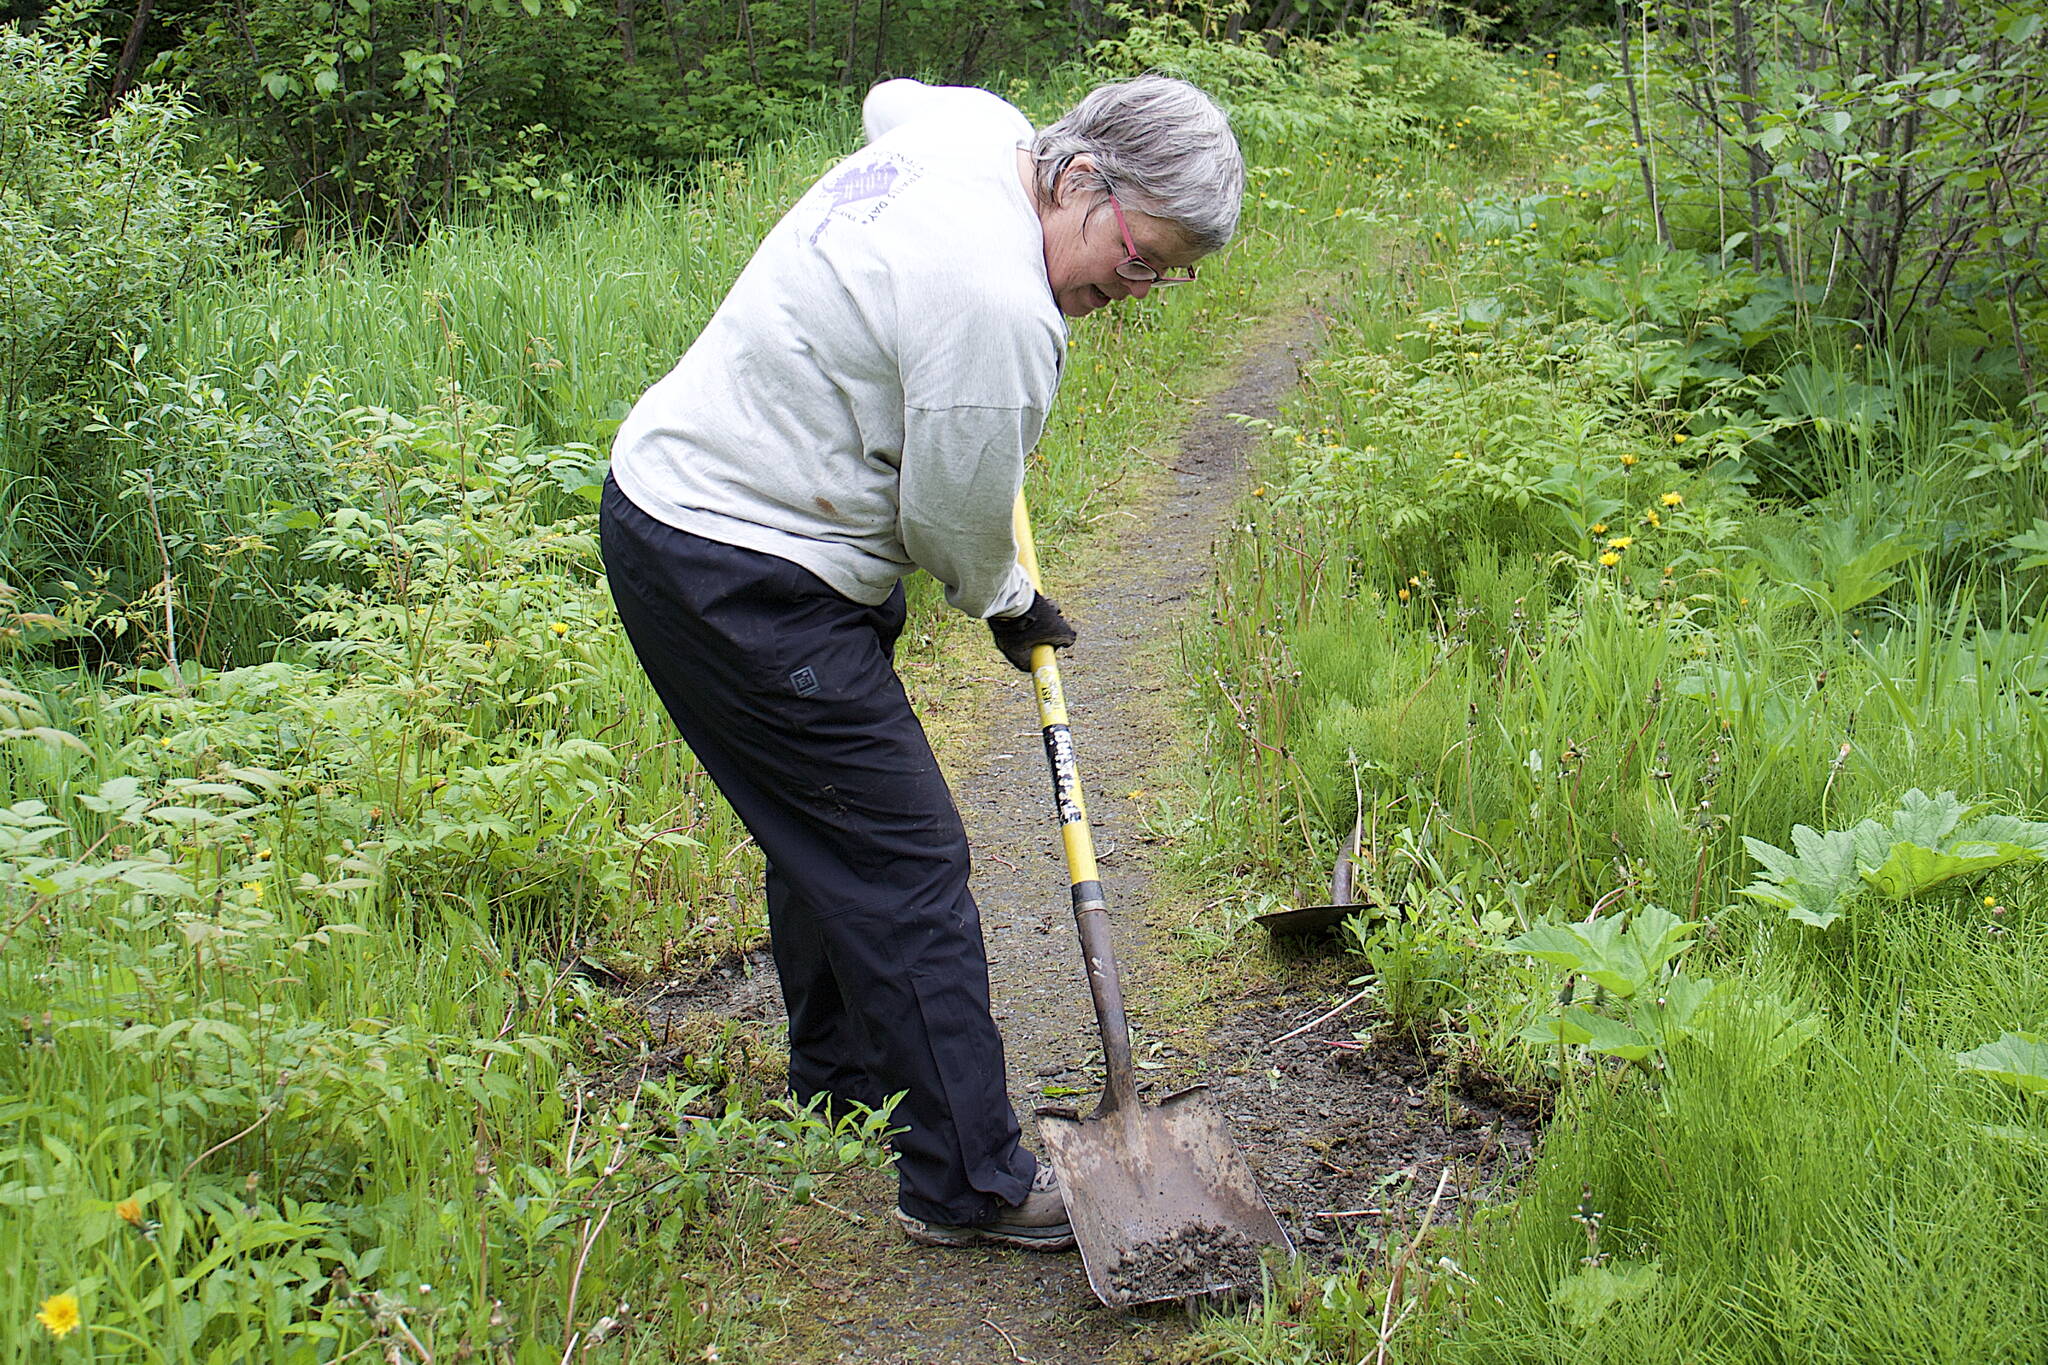 Kim Kiefer, a former city manager and Parks and Director for the City and Borough of Juneau, uses a shovel to clear vegetation from the Kingfisher Pond Loop Trail on Saturday. (Mark Sabatini / Juneau Empire)